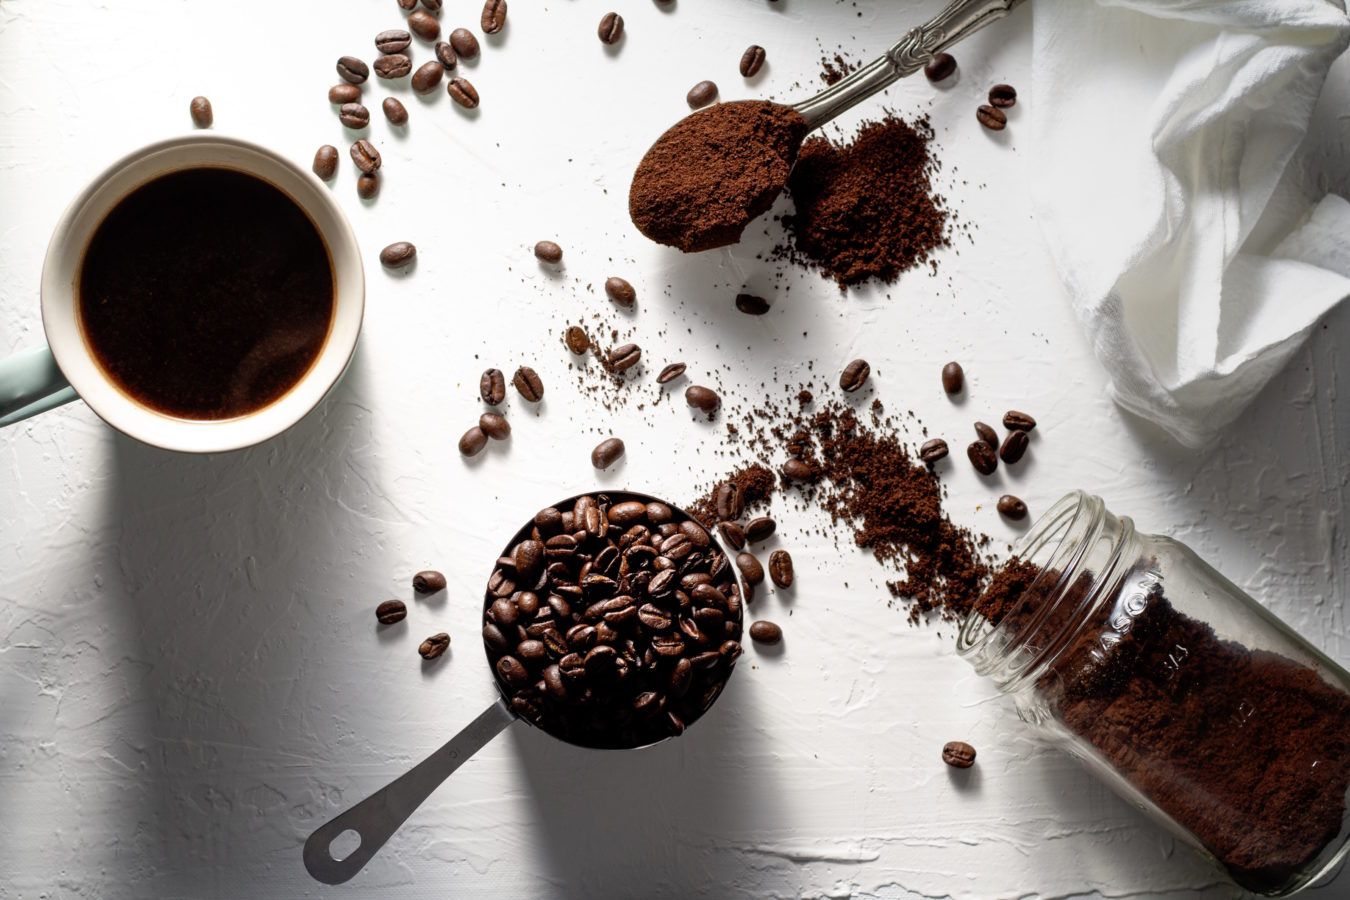 Cut the caffeine: 5 alternatives to coffee you need to try out